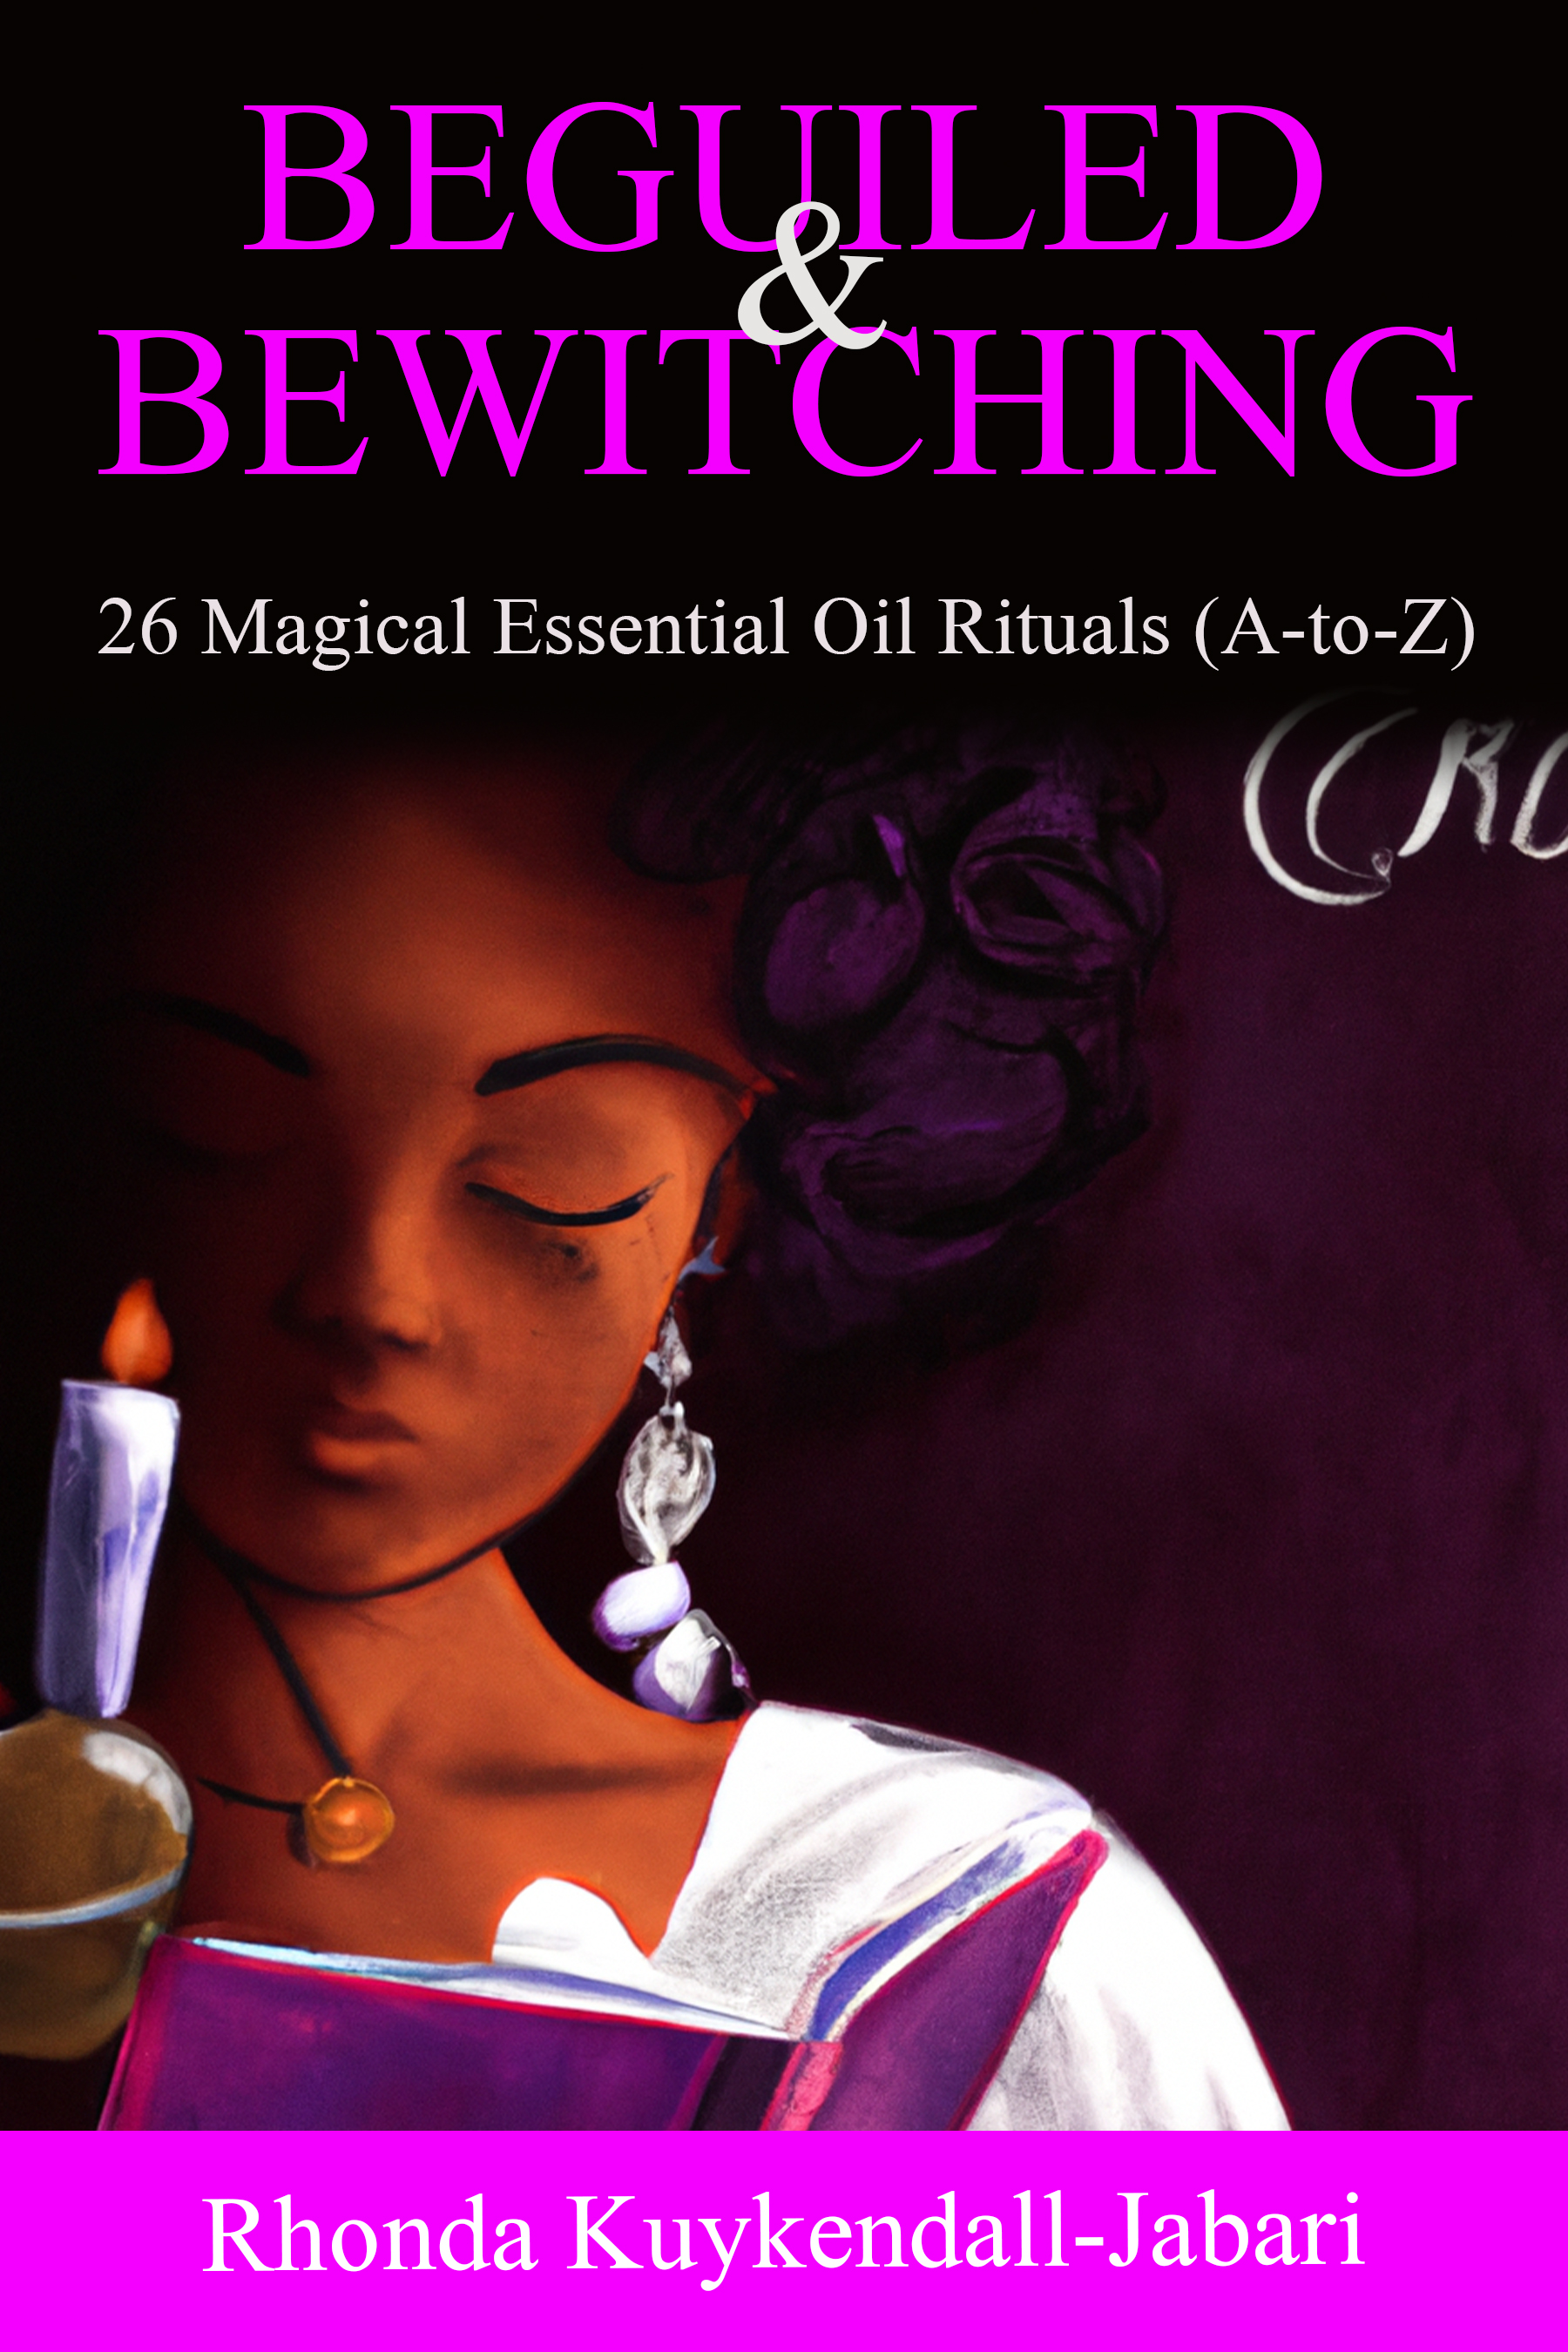 Buy My Book: Beguiled & Bewitching thumbnail